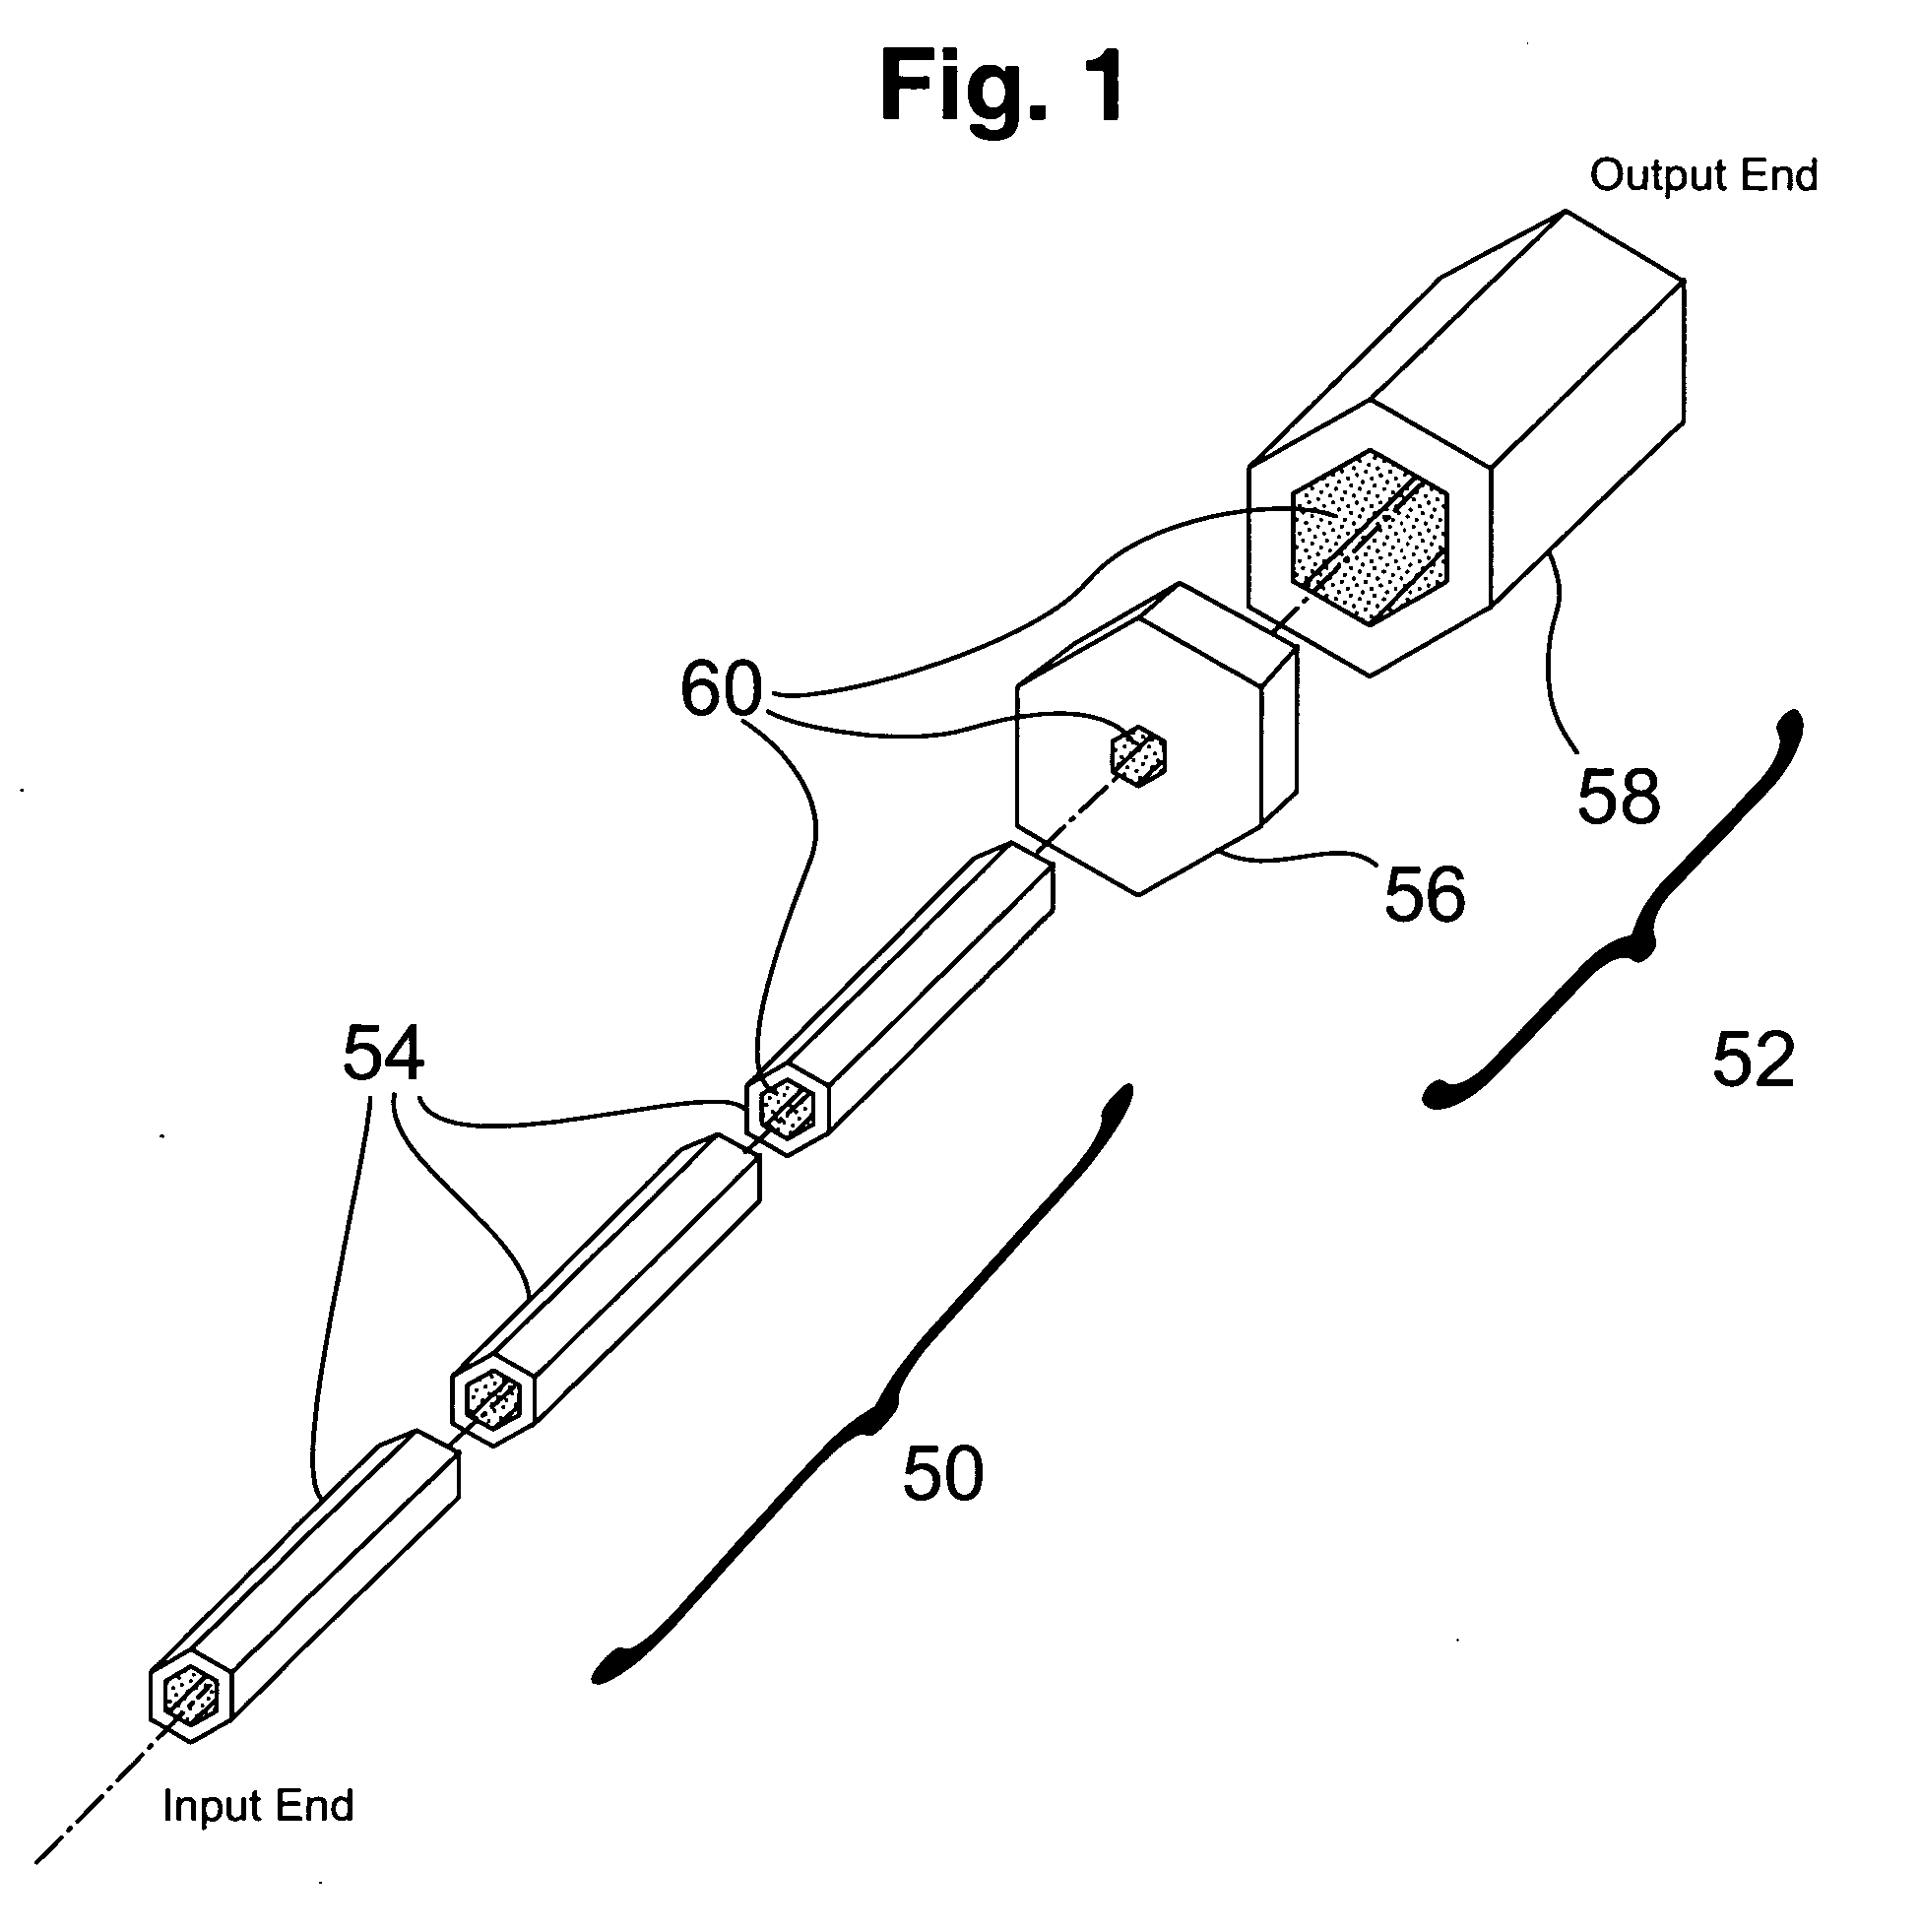 Illumination system optimized for throughput and manufacturability